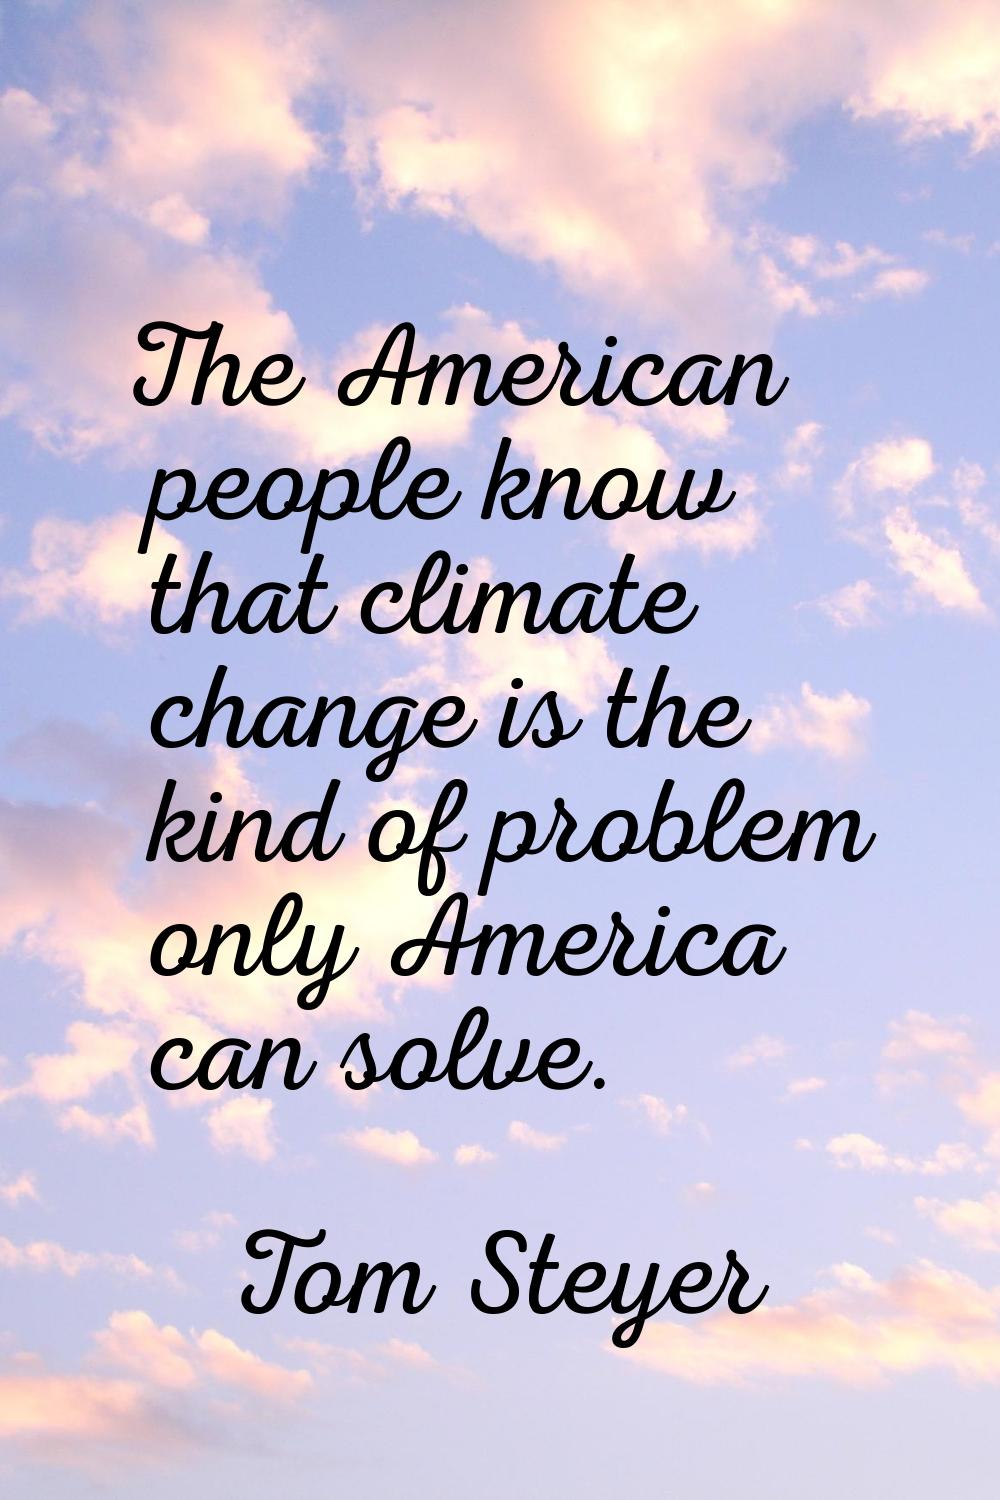 The American people know that climate change is the kind of problem only America can solve.